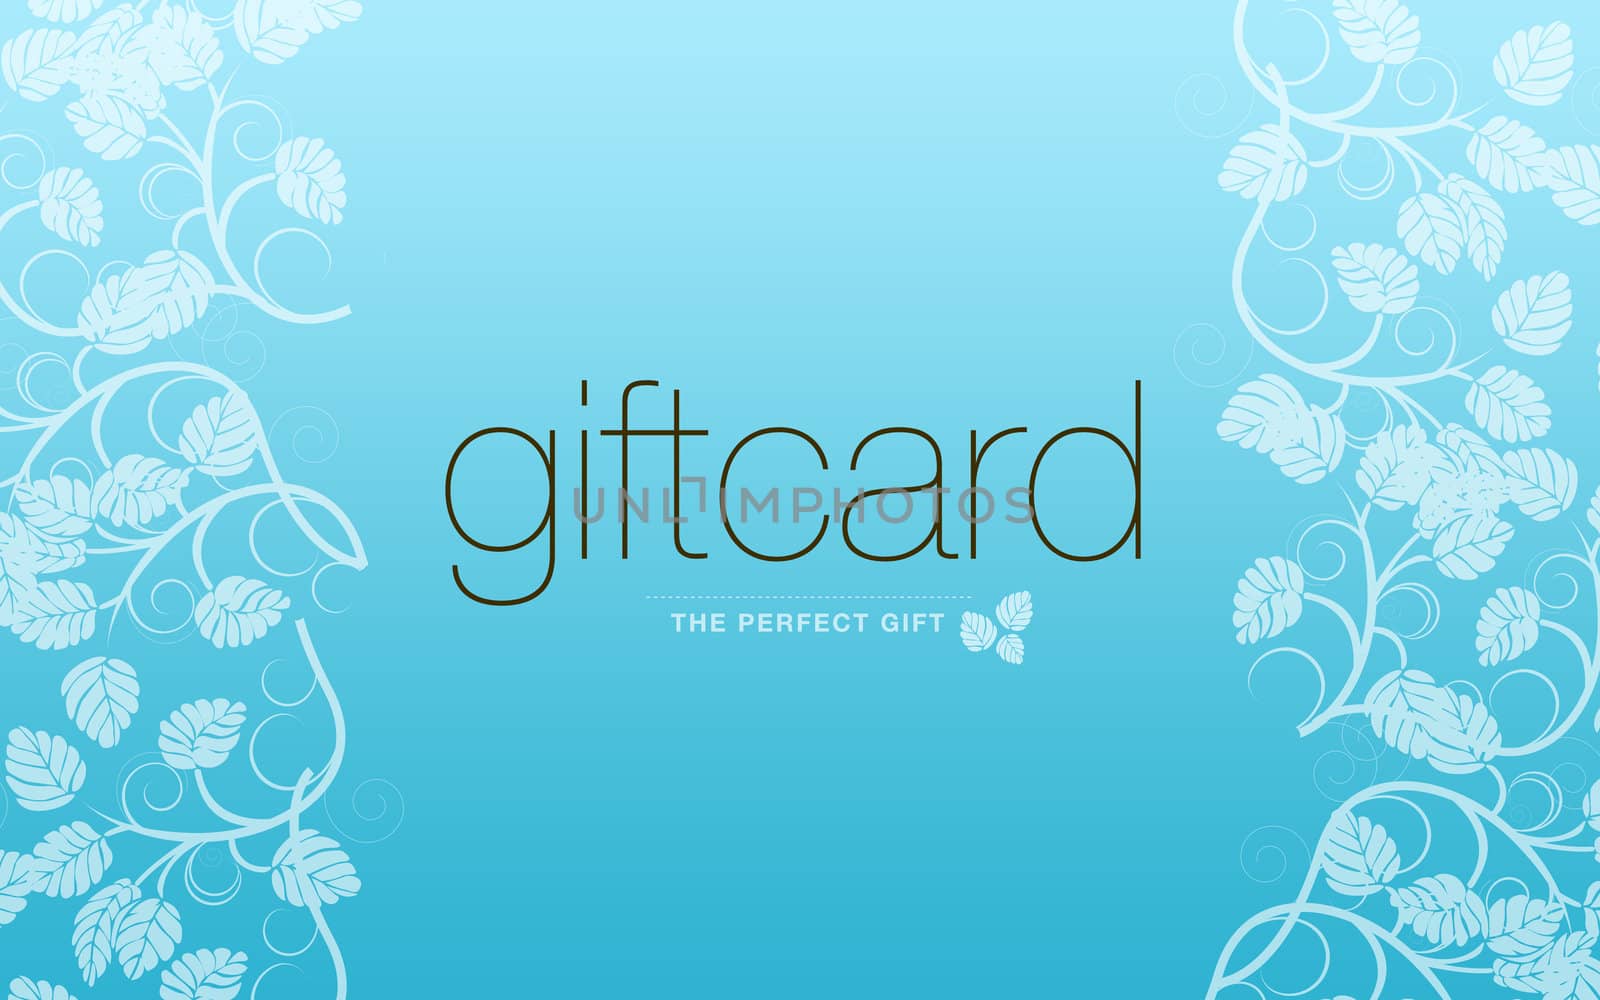 High resolution gift card graphic - the perfect gift.